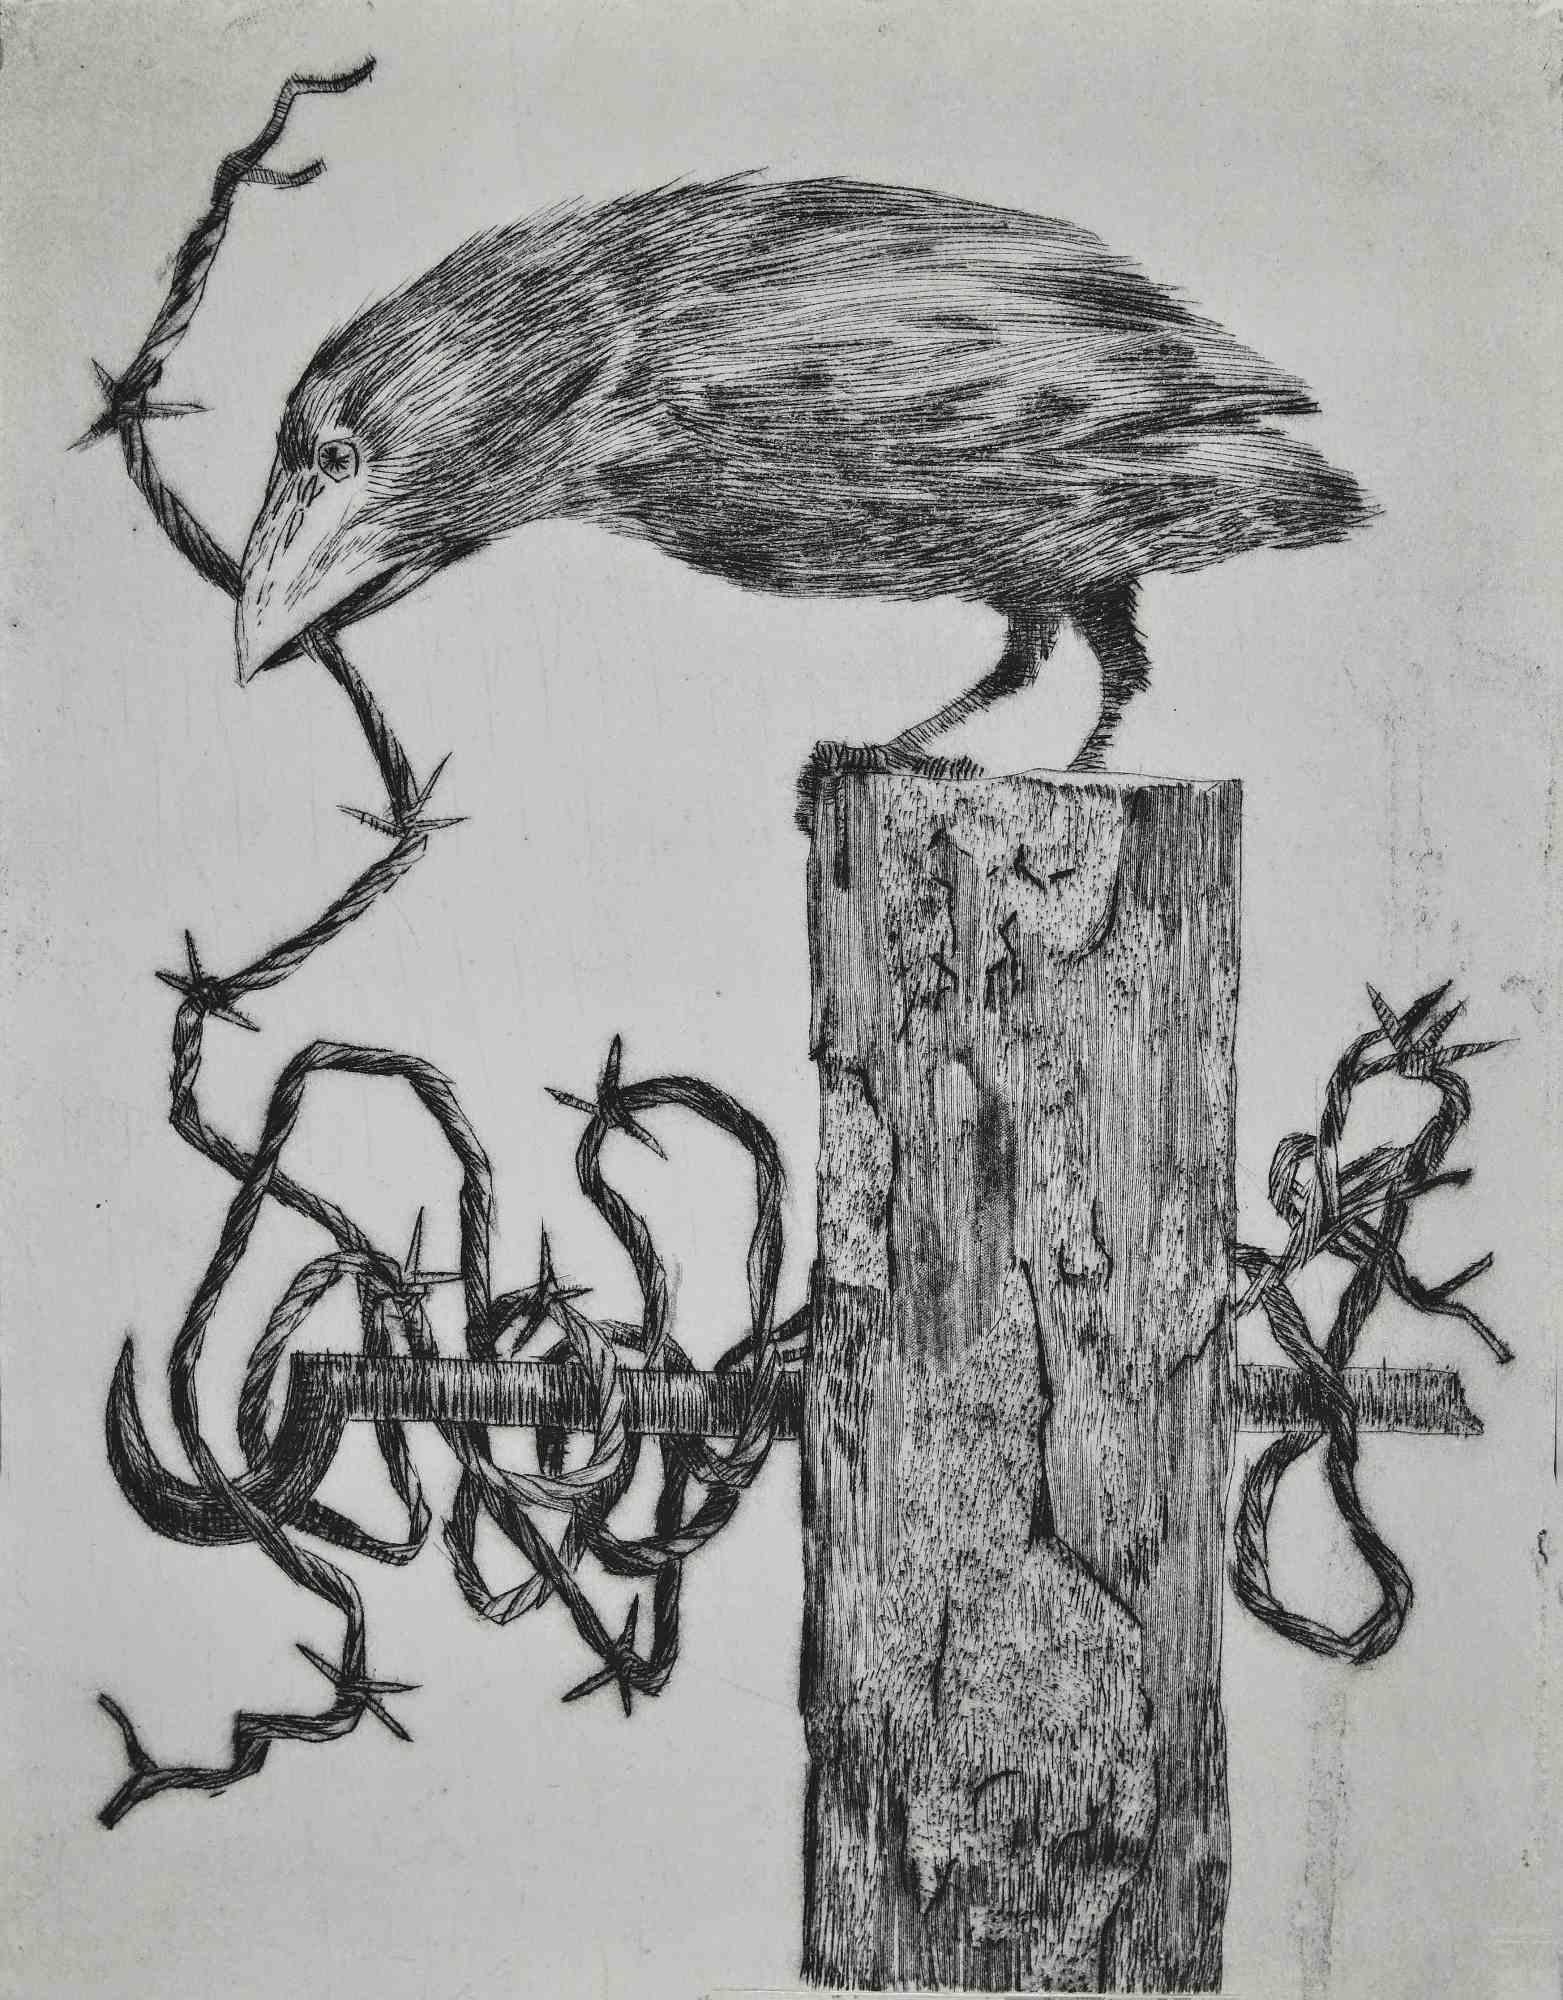 Crow is an Etching realized by Leo Guida in the 1970s on cardboard.

Good condition.

Artist sensitive to current issues, artistic movements and historical techniques, Leo Guida has been able to weave a productive interview on art and the function